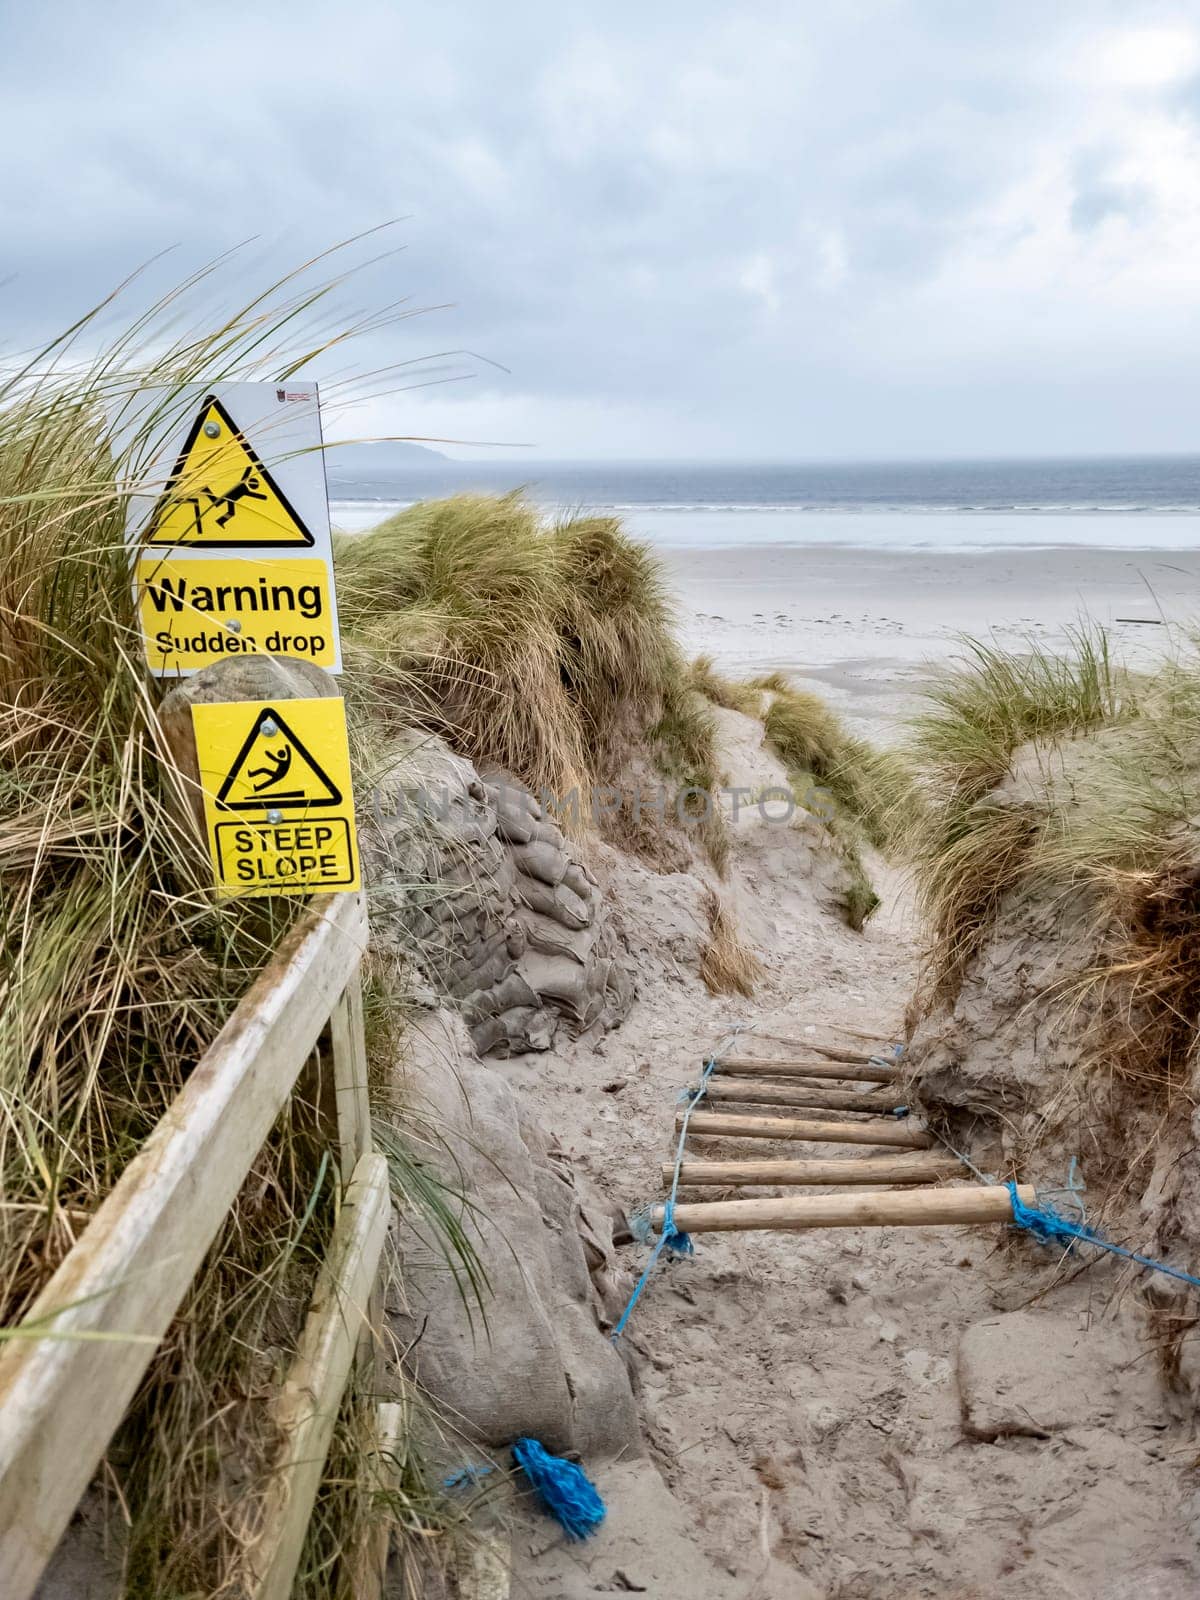 Signs warning of Sudden Drop and Steep Slope at Dooey beach by Lettermacaward in County Donegal - Ireland